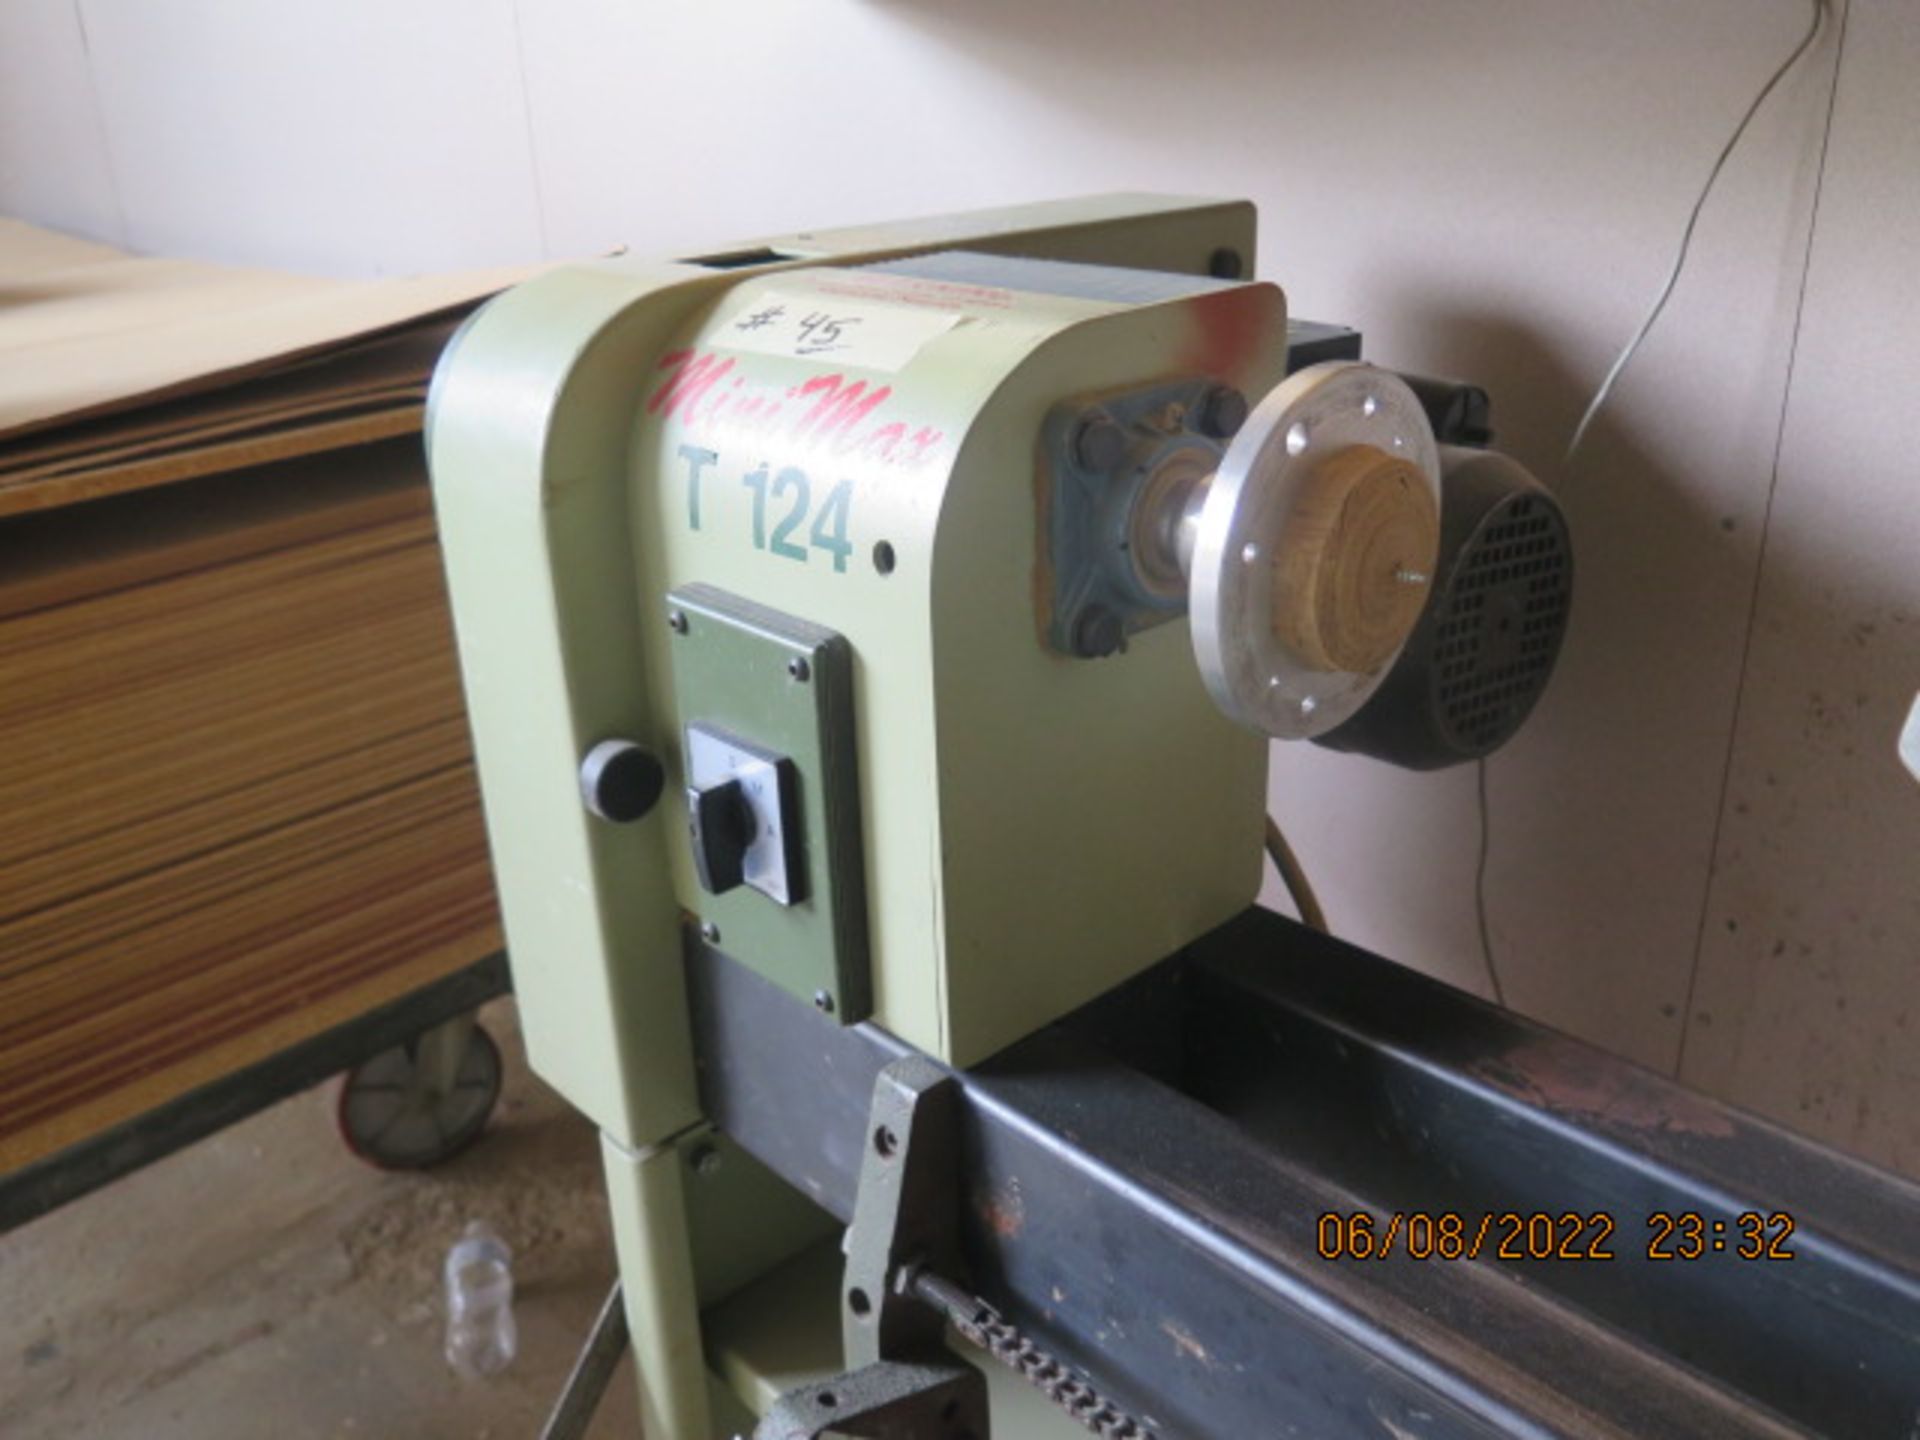 Samco MiniMax T124 16” x 96” Wood Lathe s/n KK/024947 w/ Tailstock, Tool Rest, SOLD AS IS - Image 3 of 7